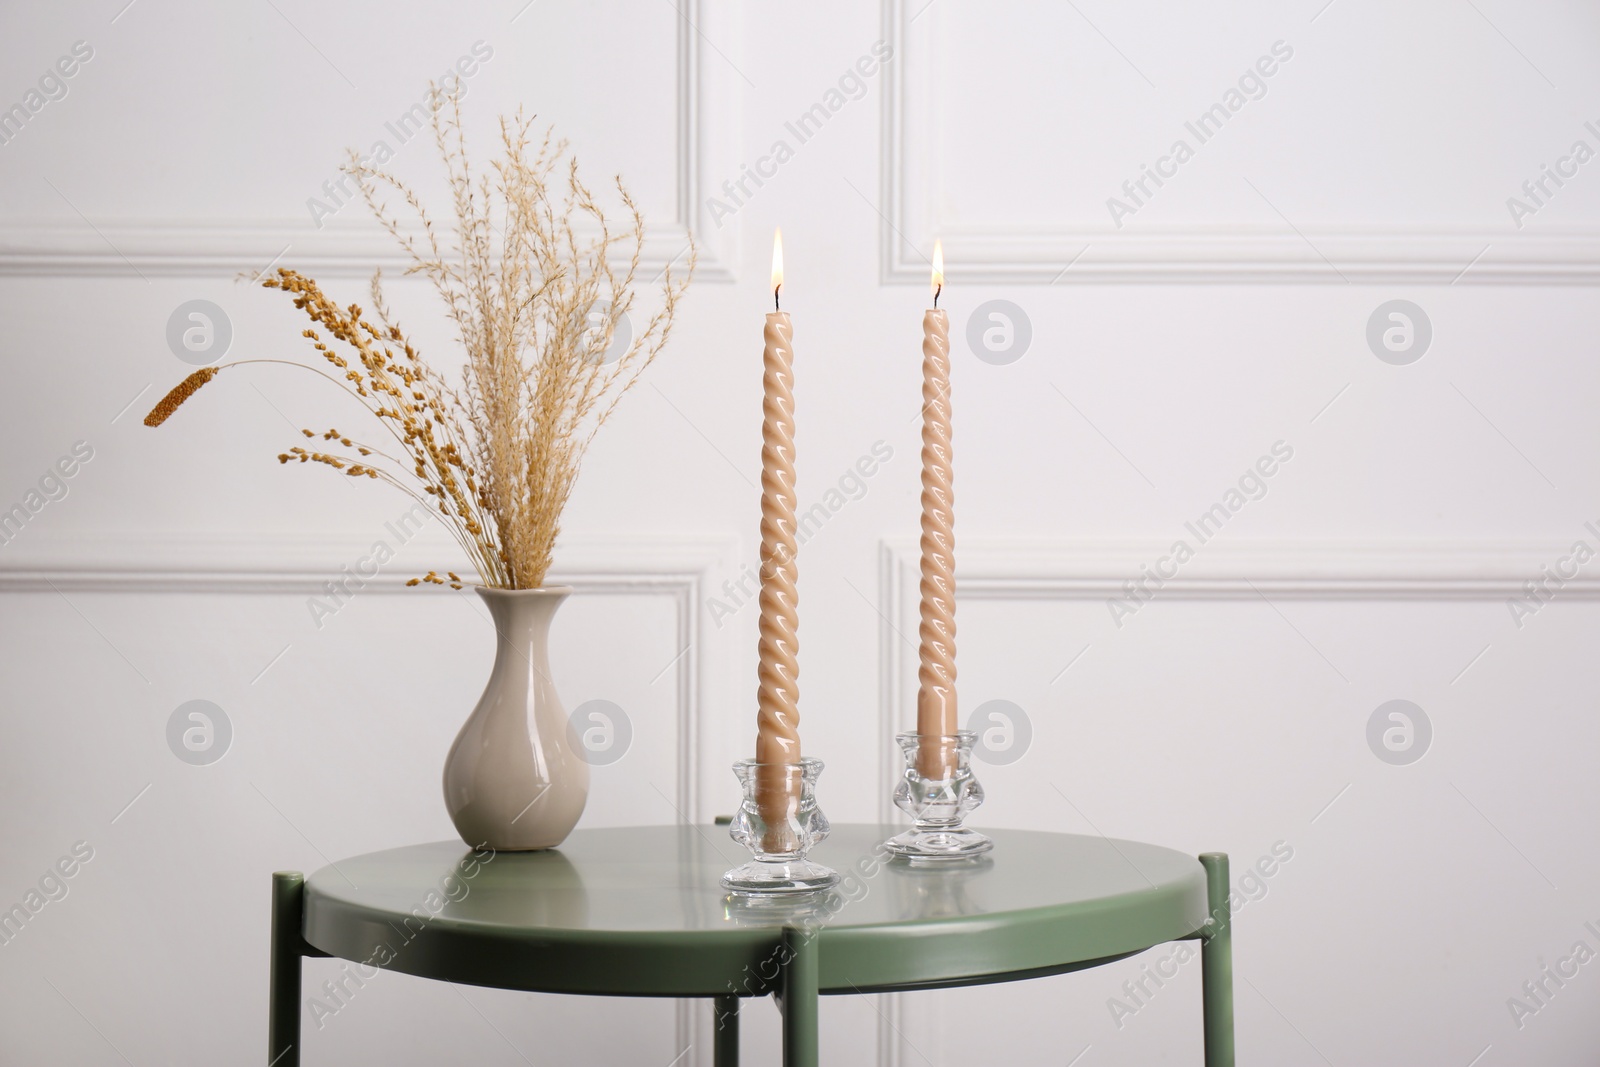 Photo of Dry plants in vase and burning candles on table near white wall